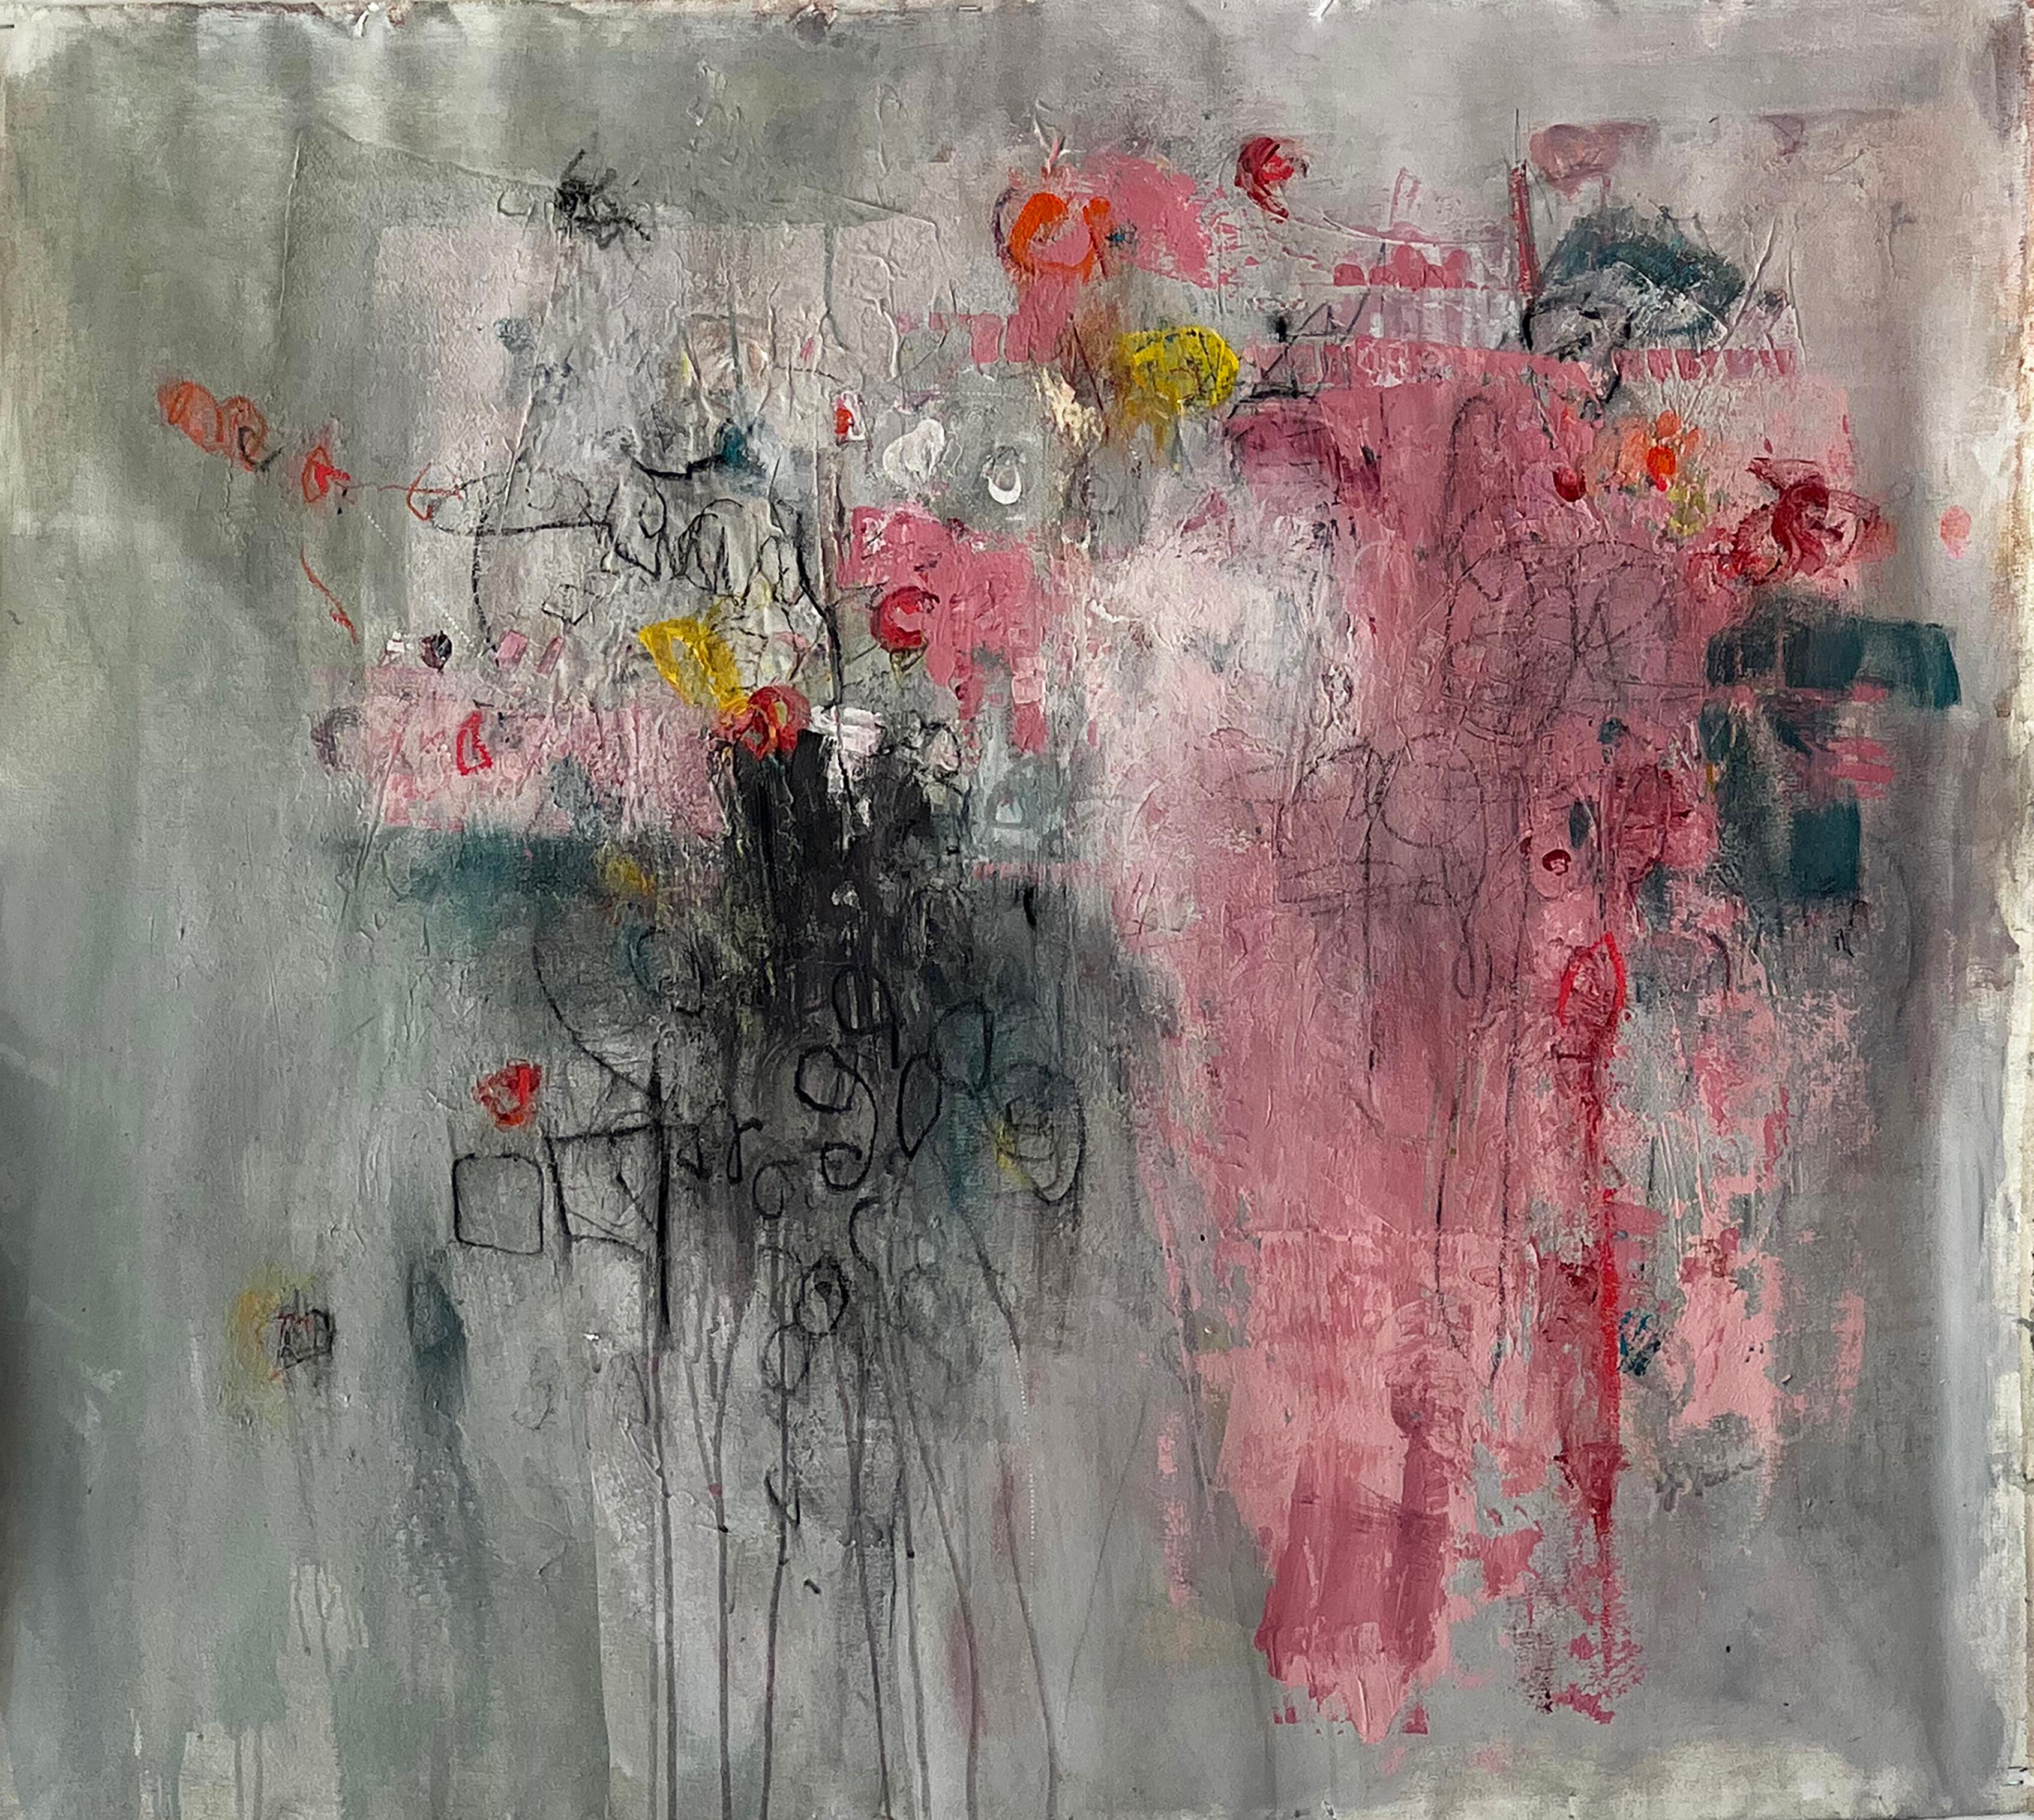 Stephanie Visser  Abstract Painting - Water and Light: Morning Sky Turns a Brilliant Pink - acrylic on canvas